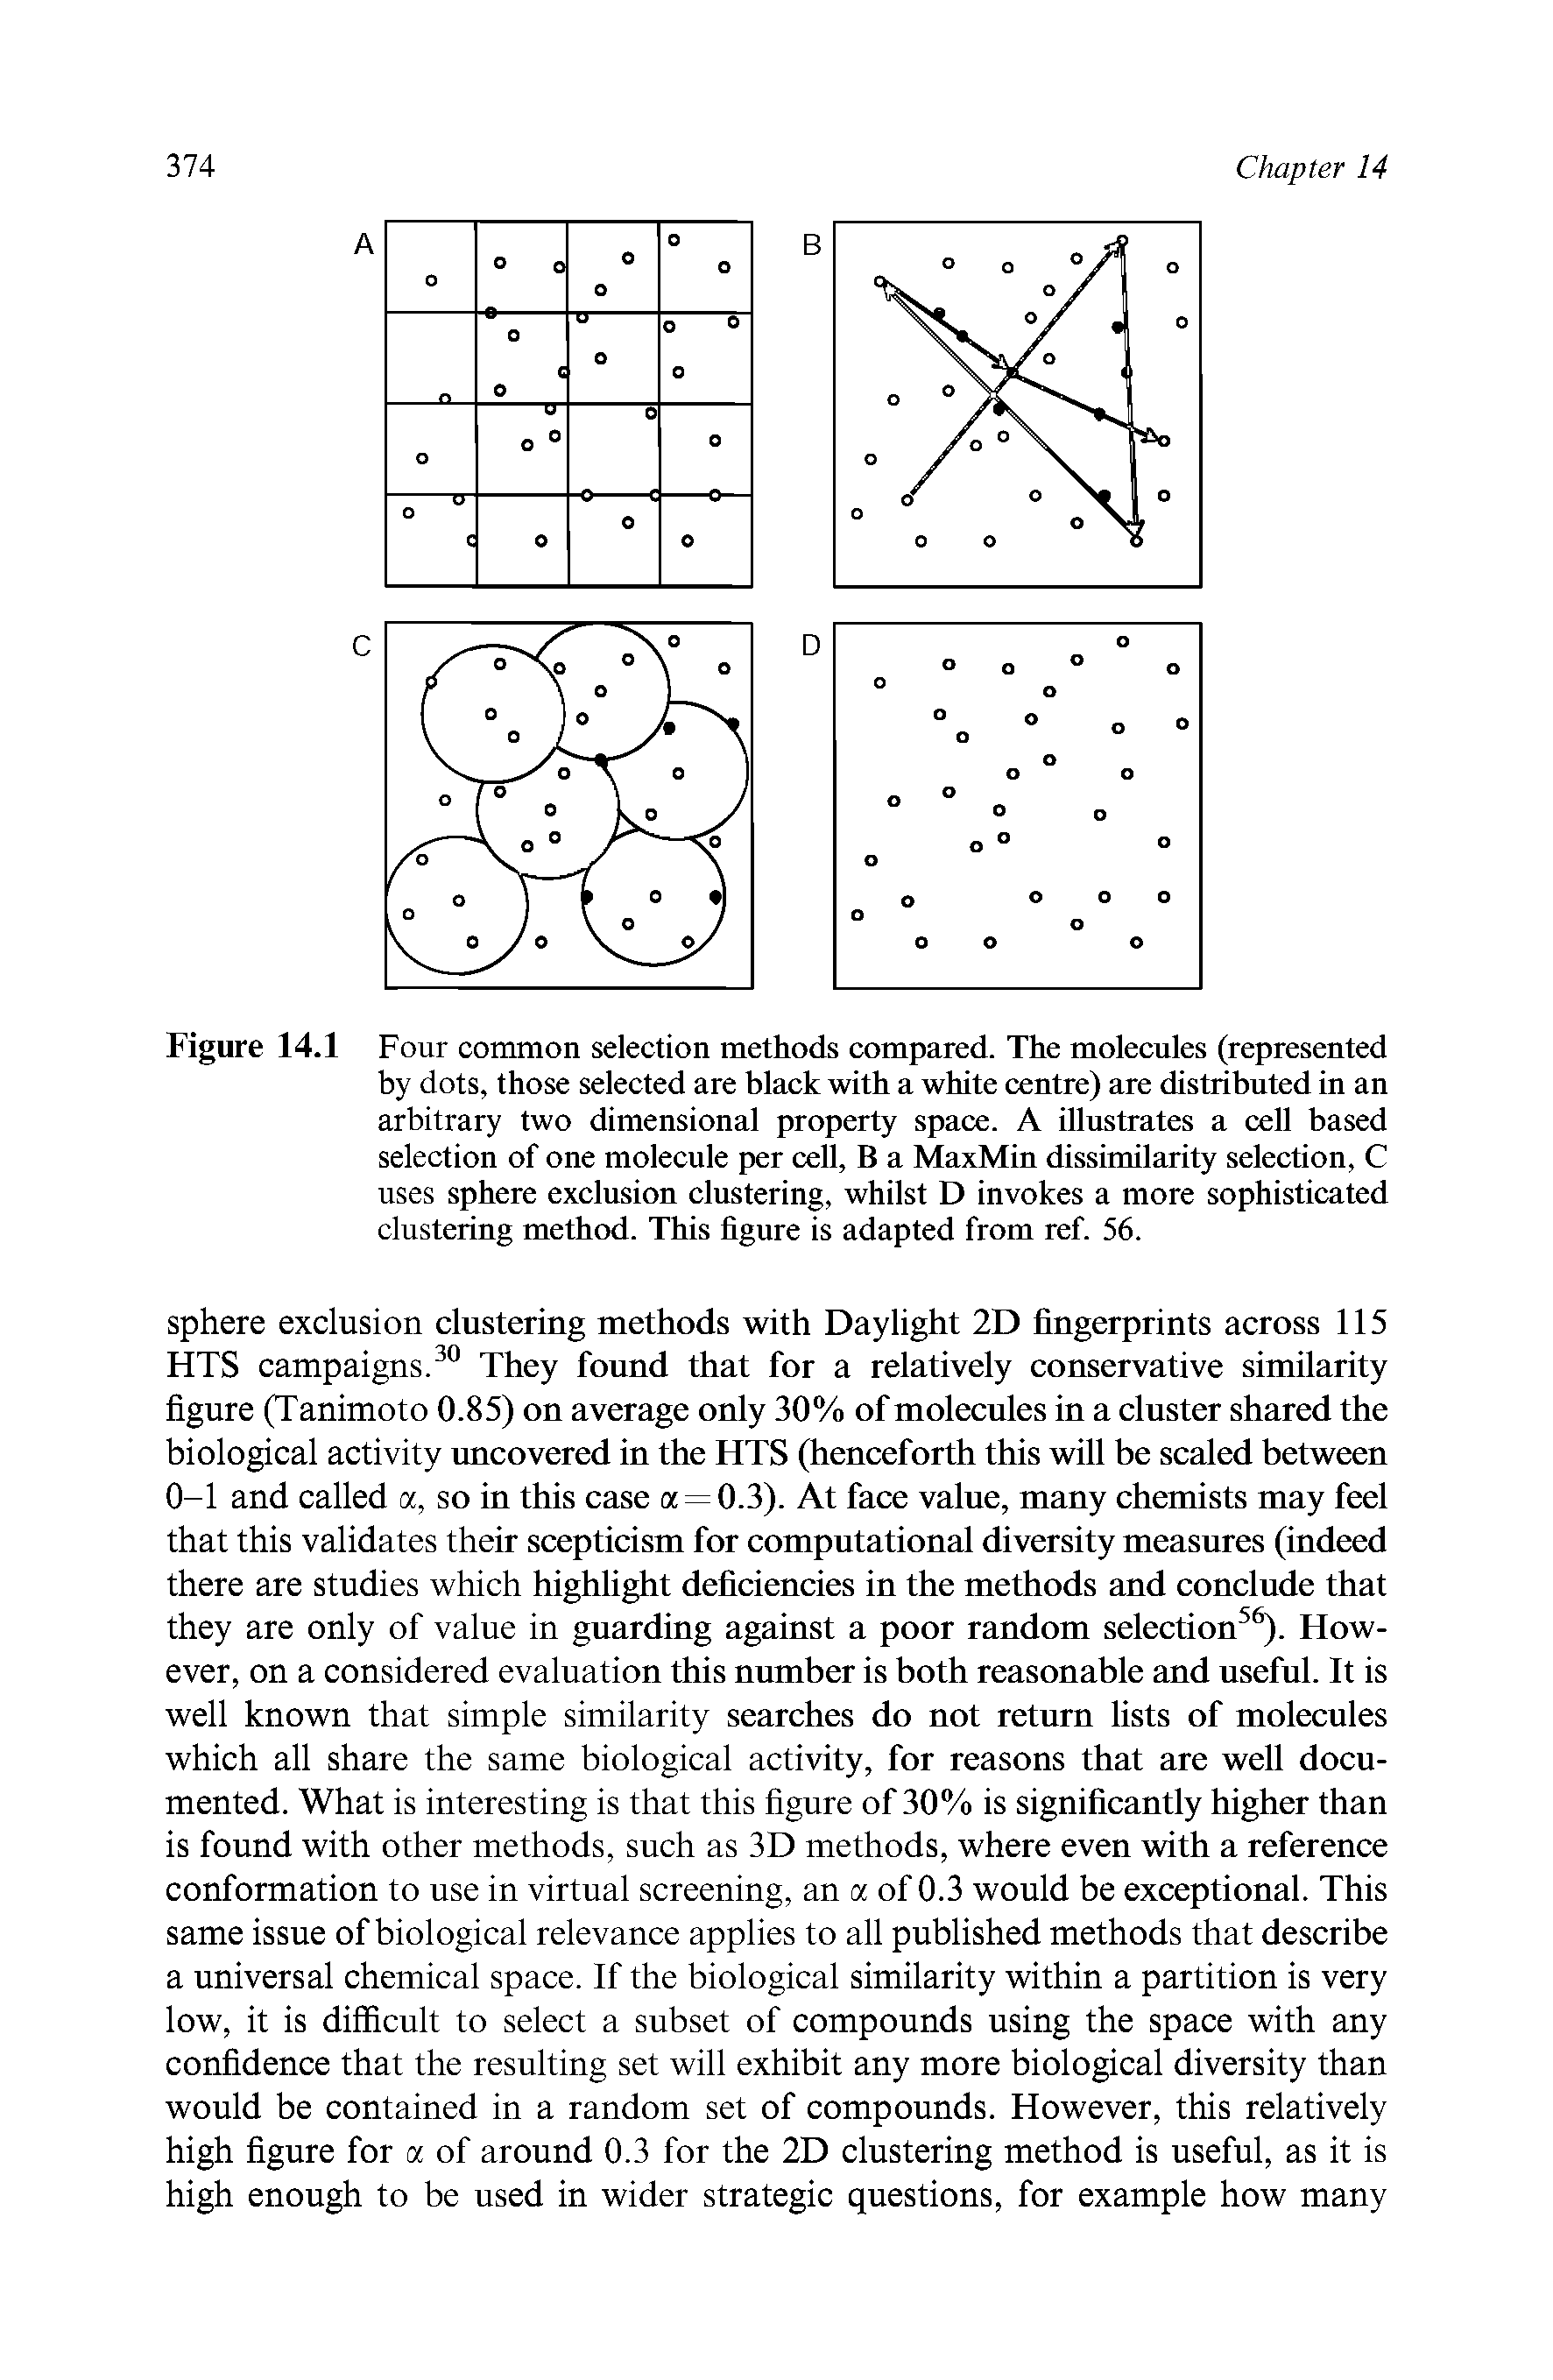 Figure 14.1 Four common selection methods compared. The molecules (represented by dots, those selected are black with a white centre) are distributed in an arbitrary two dimensional property space. A illustrates a cell based selection of one molecule per cell, B a MaxMin dissimilarity selection, C uses sphere exclusion clustering, whilst D invokes a more sophisticated clustering method. This figure is adapted from ref. 56.